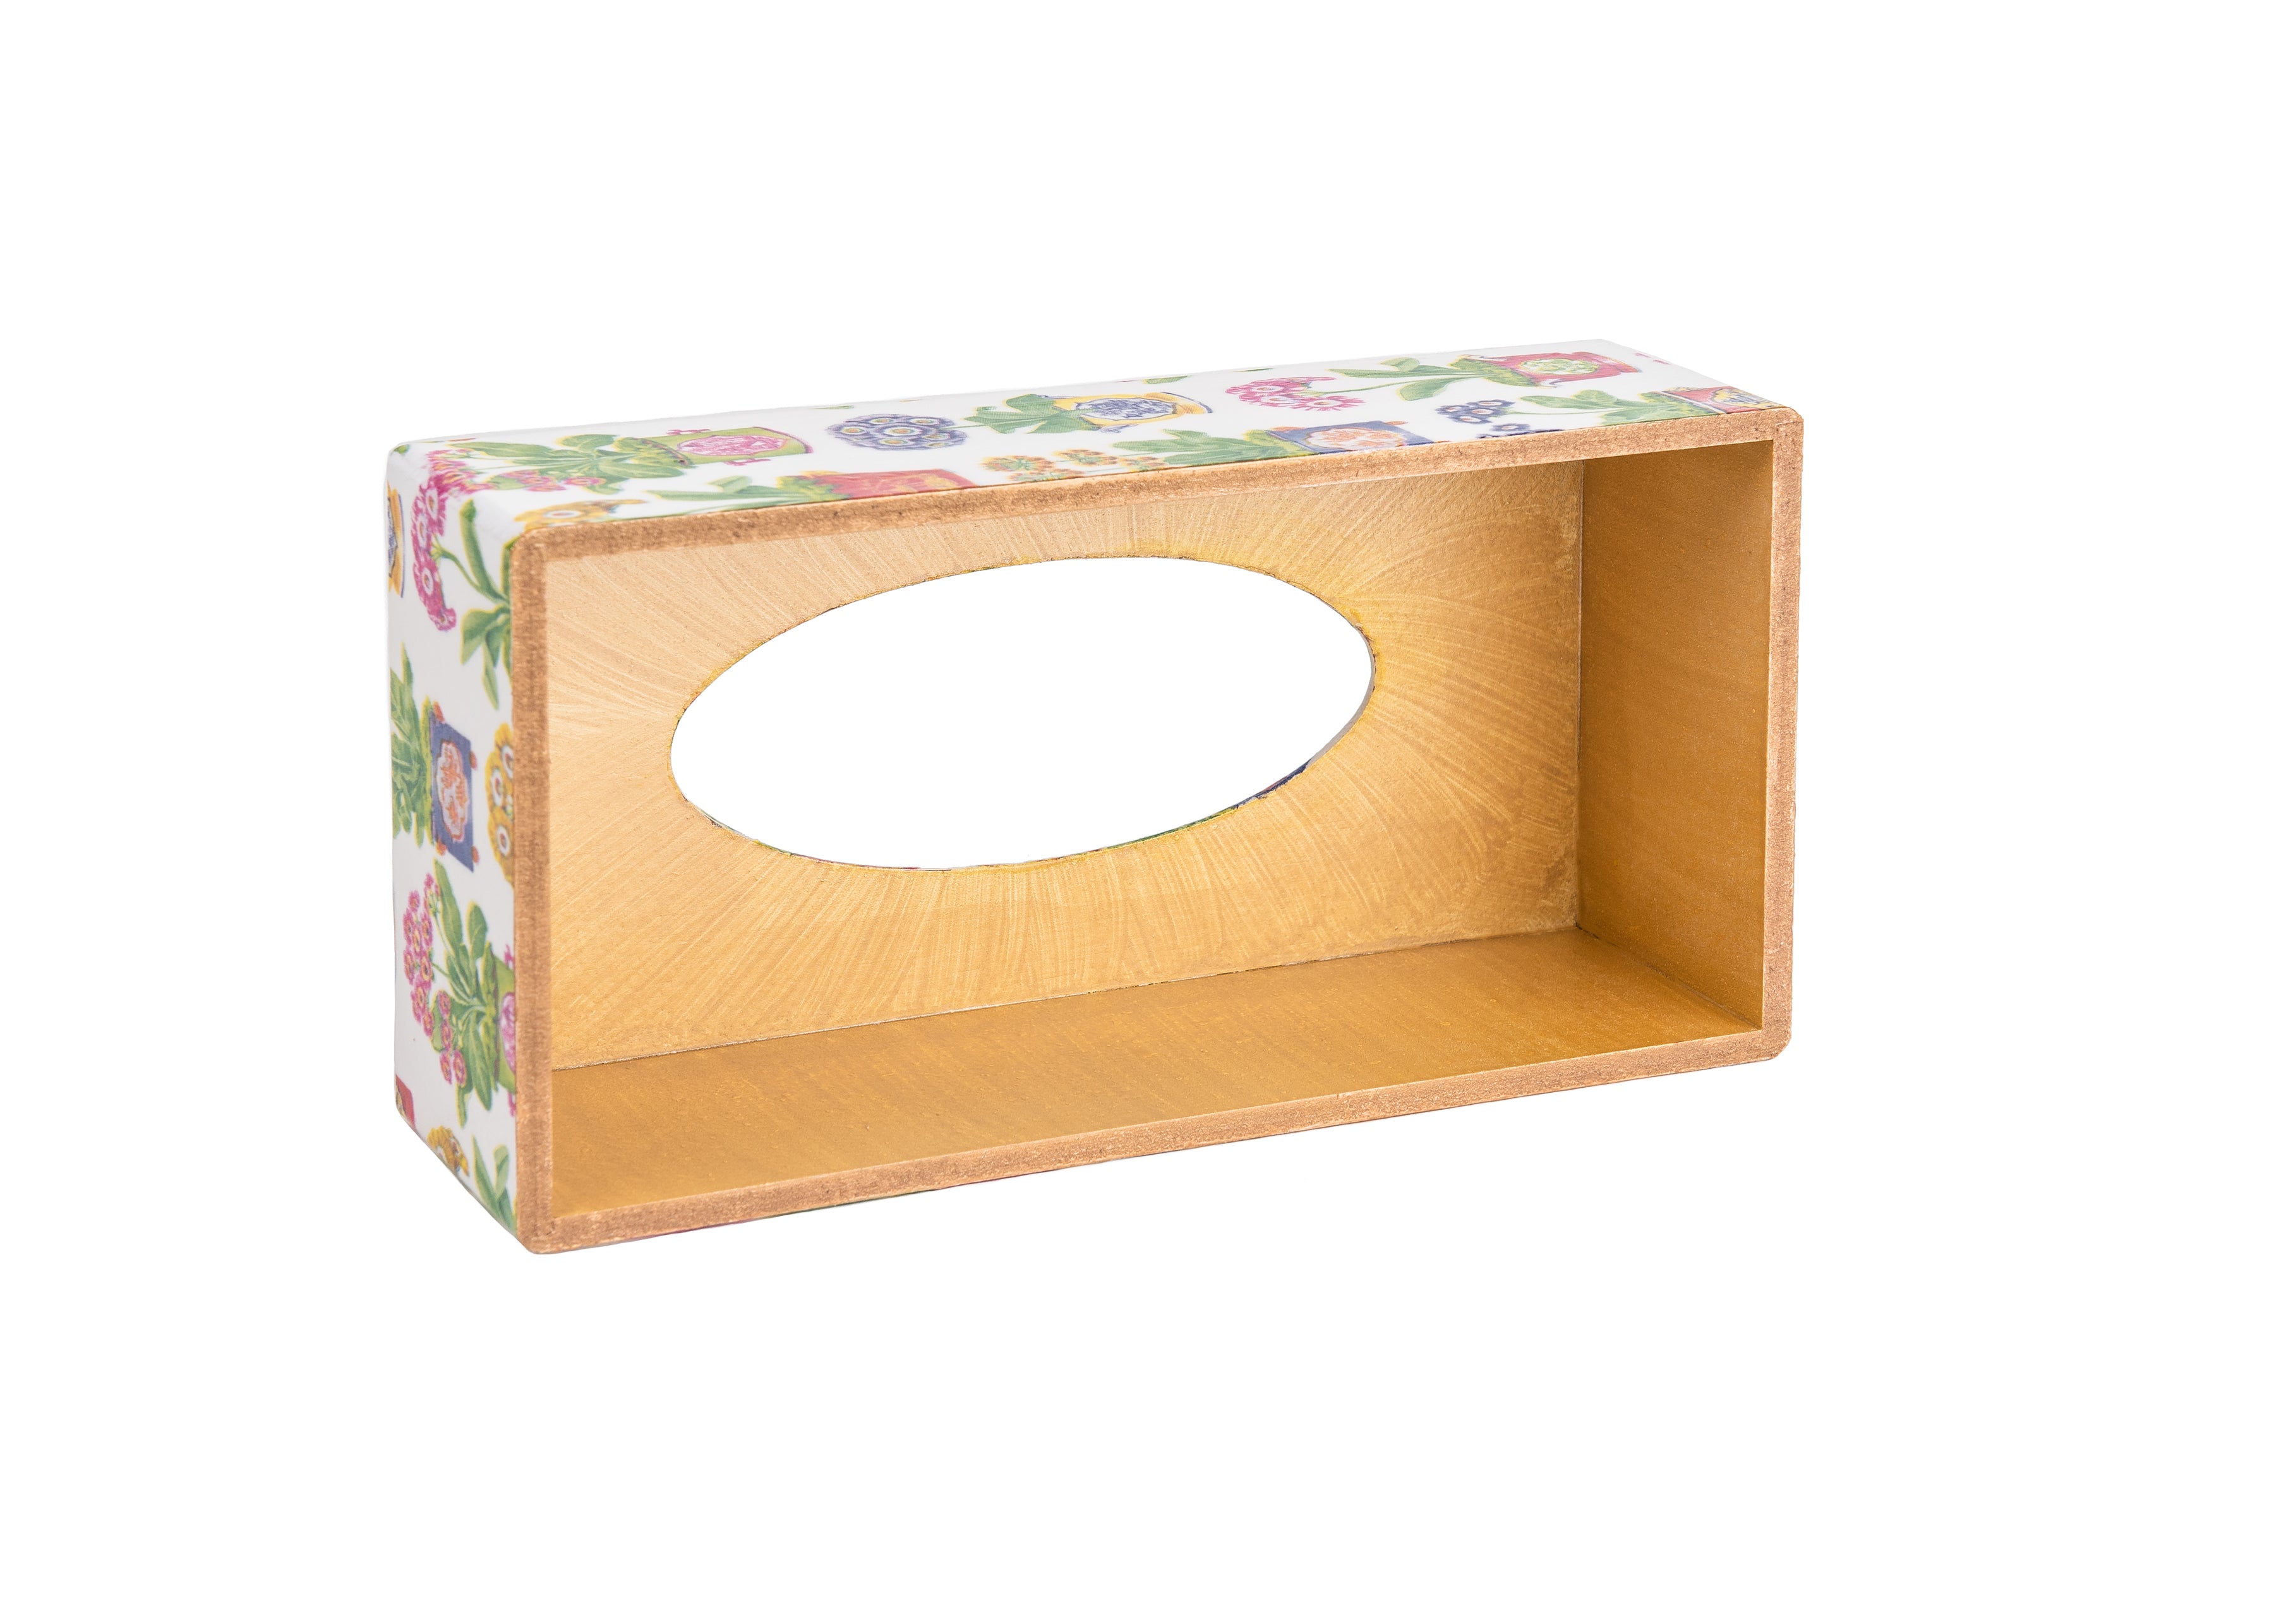 Pimpernel Long wooden tissue box cover